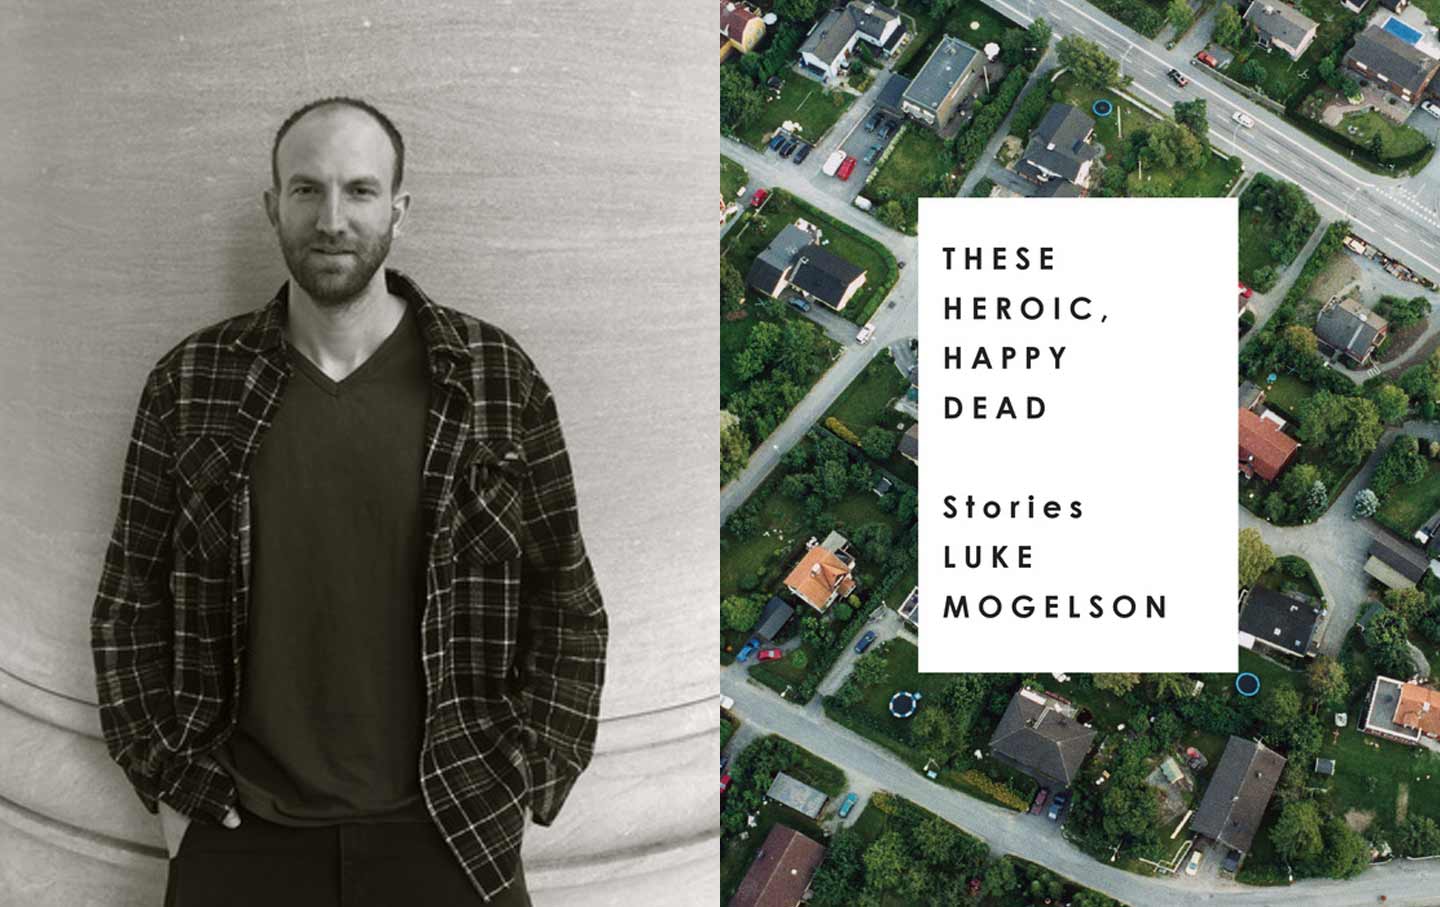 Author Luke Mogelson and his book These Heroic, Happy Dead